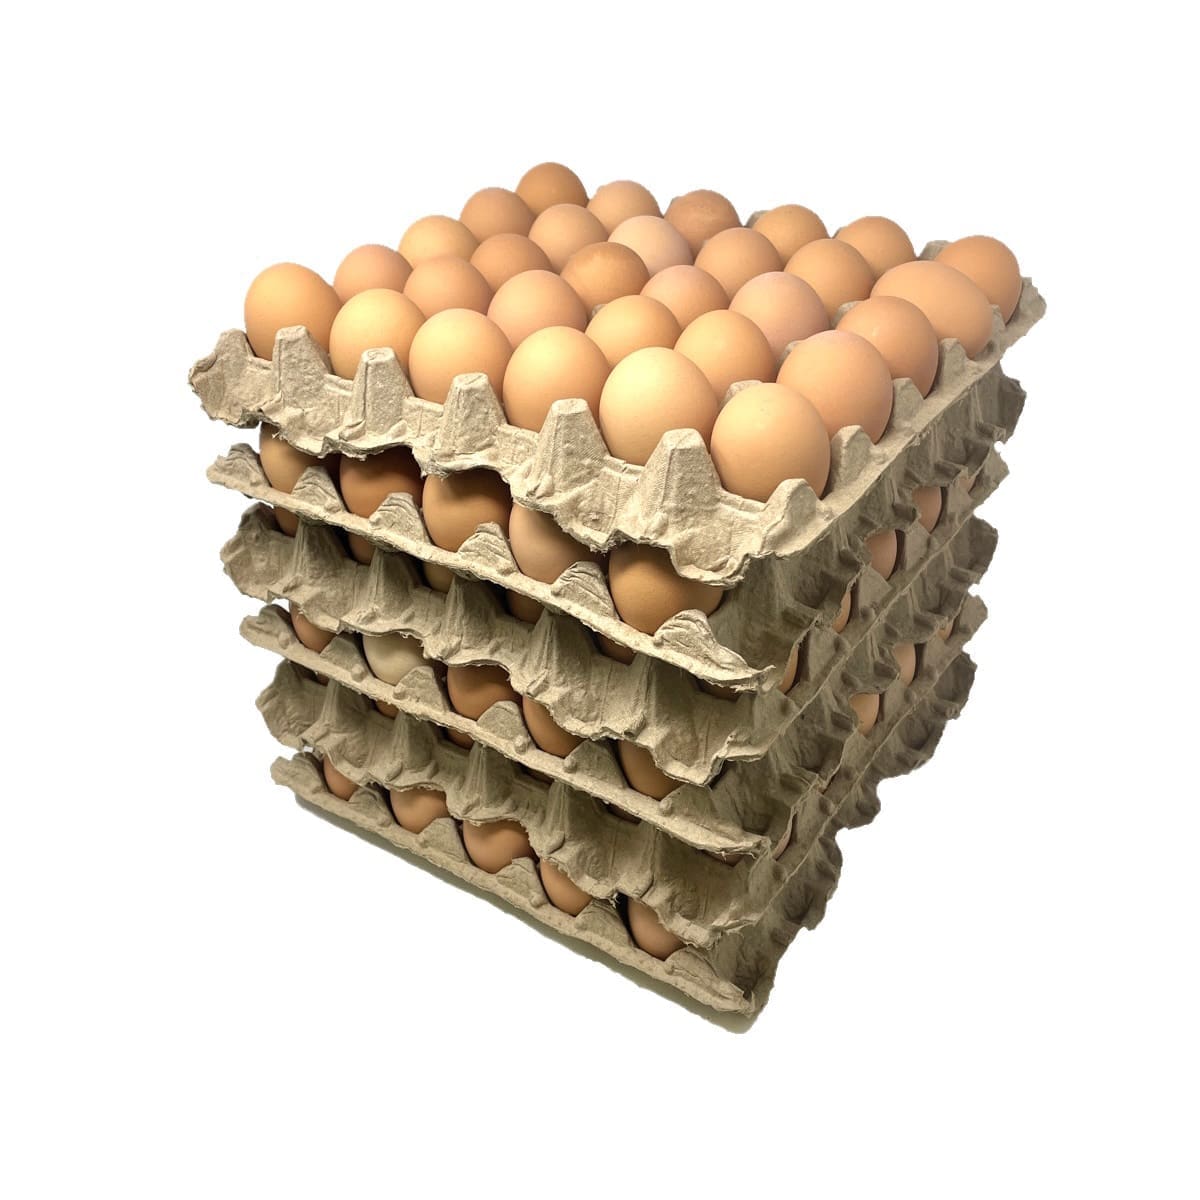 Large Brown Eggs (180 count)